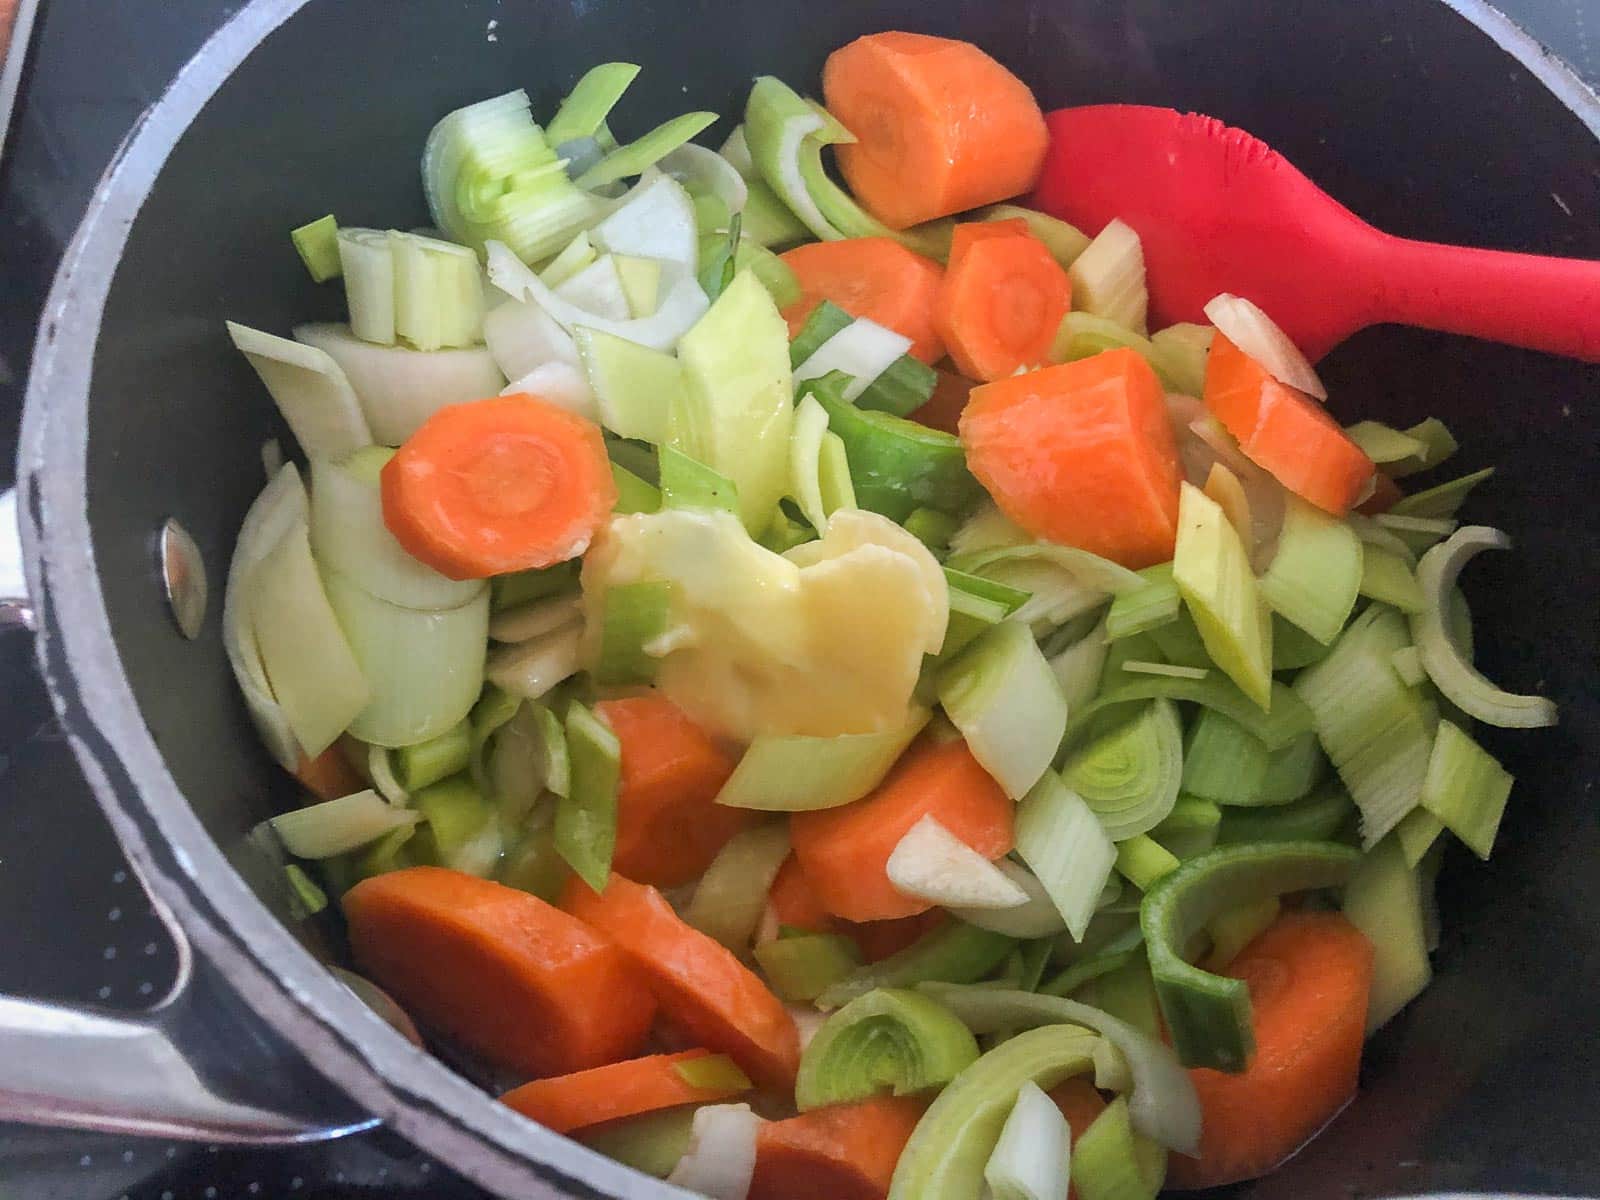 Leeks and carrots sauteeing with butter in a fry pan.